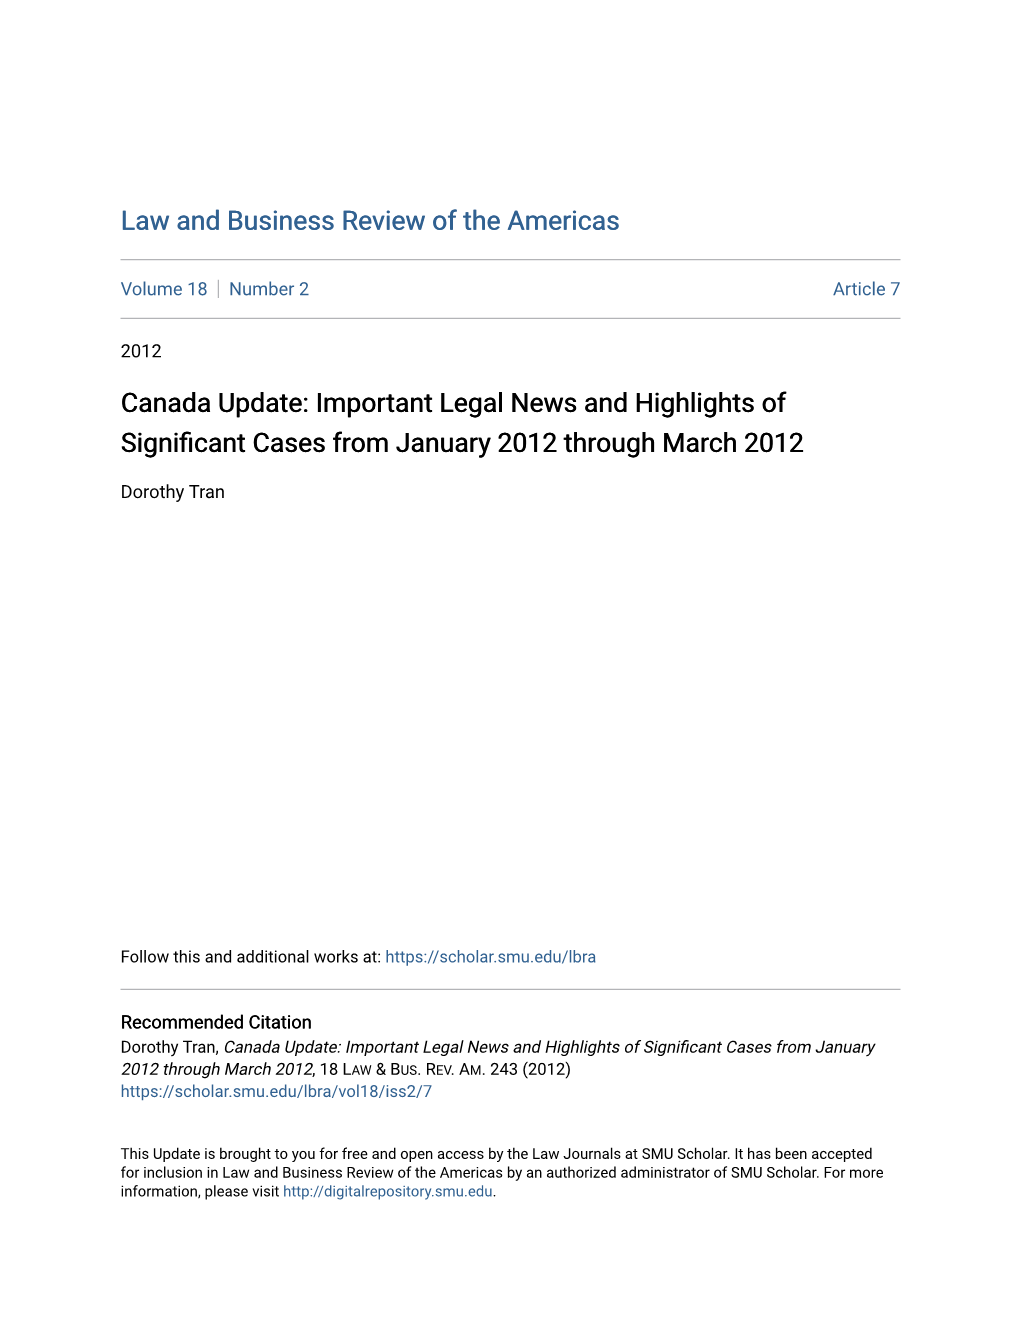 Canada Update: Important Legal News and Highlights of Significant Cases from January 2012 Through March 2012